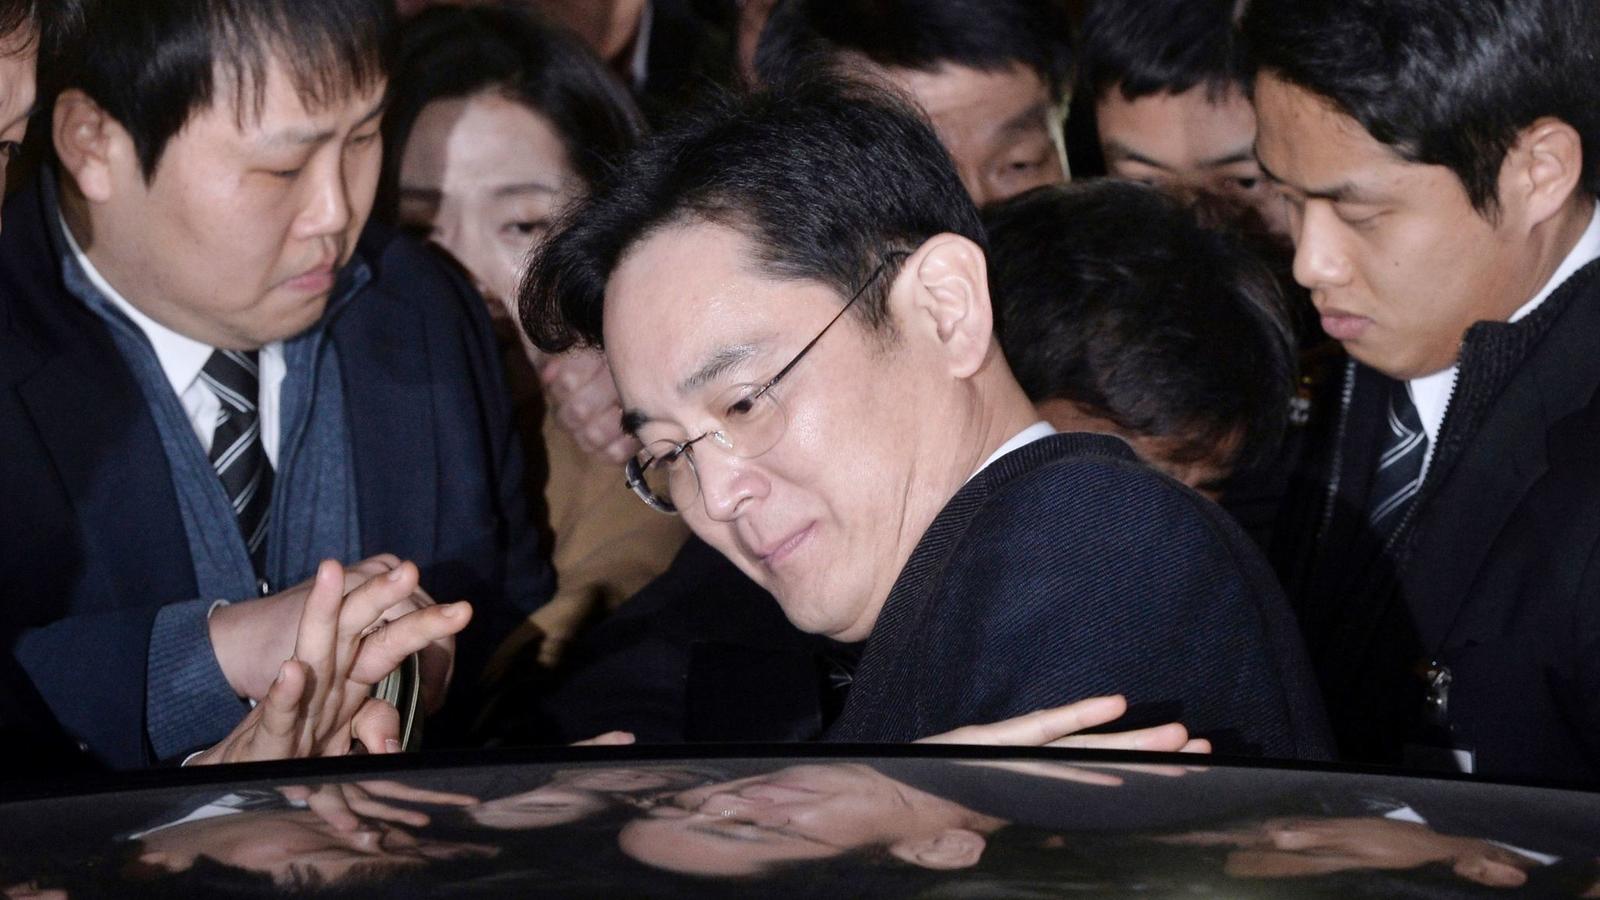 Samsung Heir Lee Jae-yong Arrested On Charges of Bribery - Koreaboo